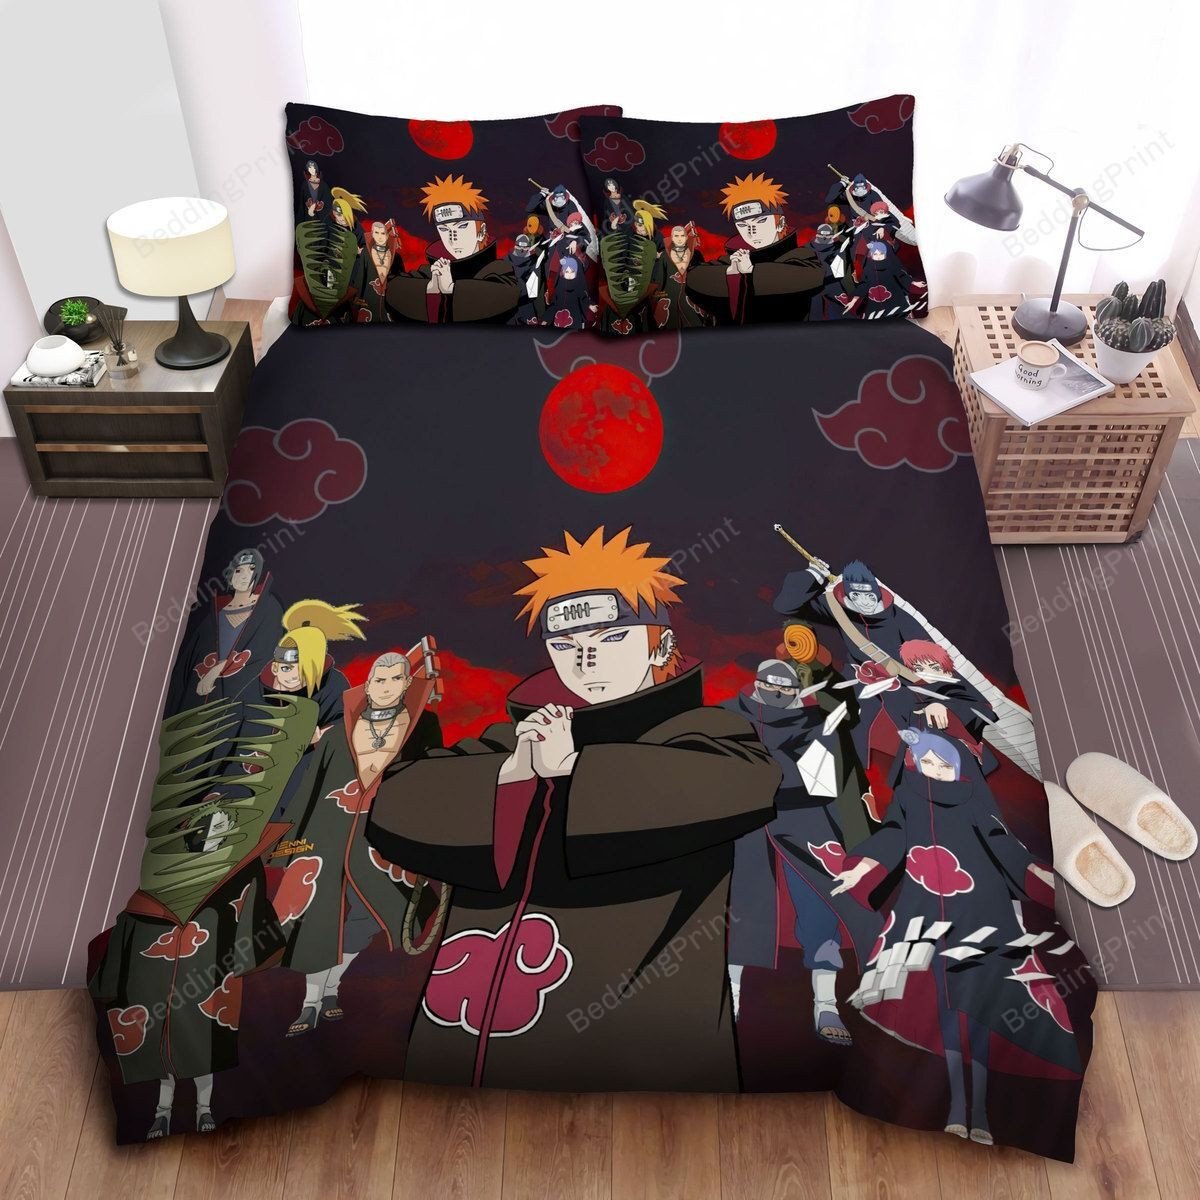 10 Members Of Akatsuki Bed Sheets Duvet Cover Bedding Sets. PLEASE NOTE: This is a duvet cover, NOT a Comforter